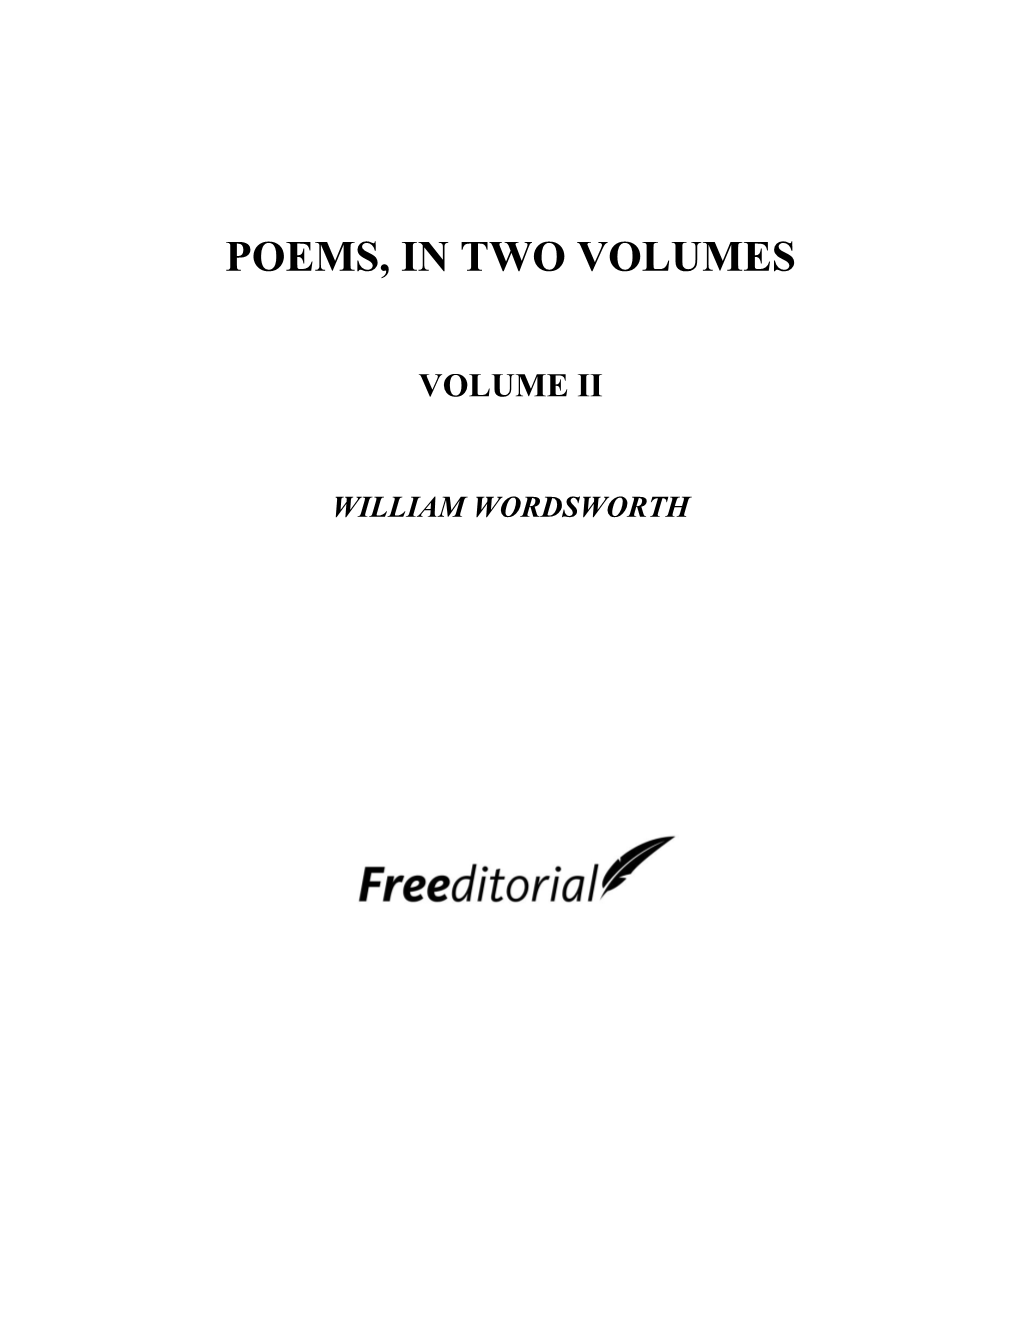 The Project Gutenberg Ebook of Poems in Two Volumes